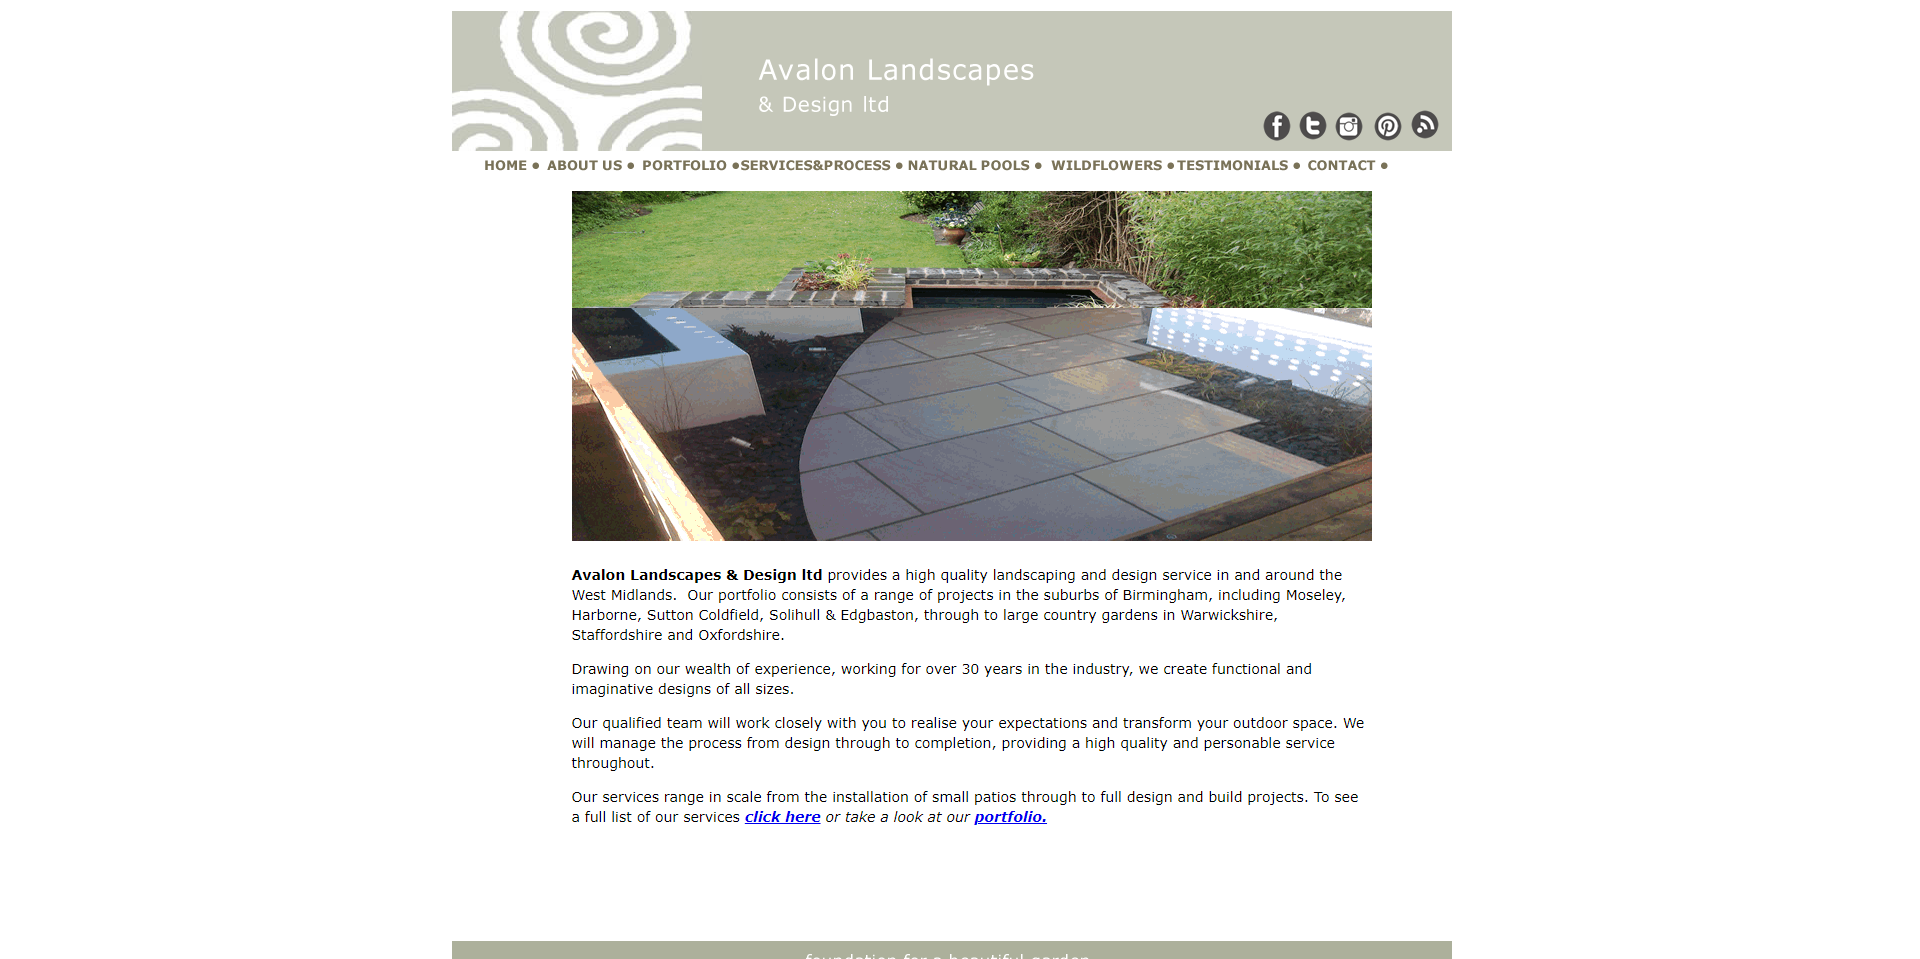 The previous Avalon Landscapes website from it'seeze